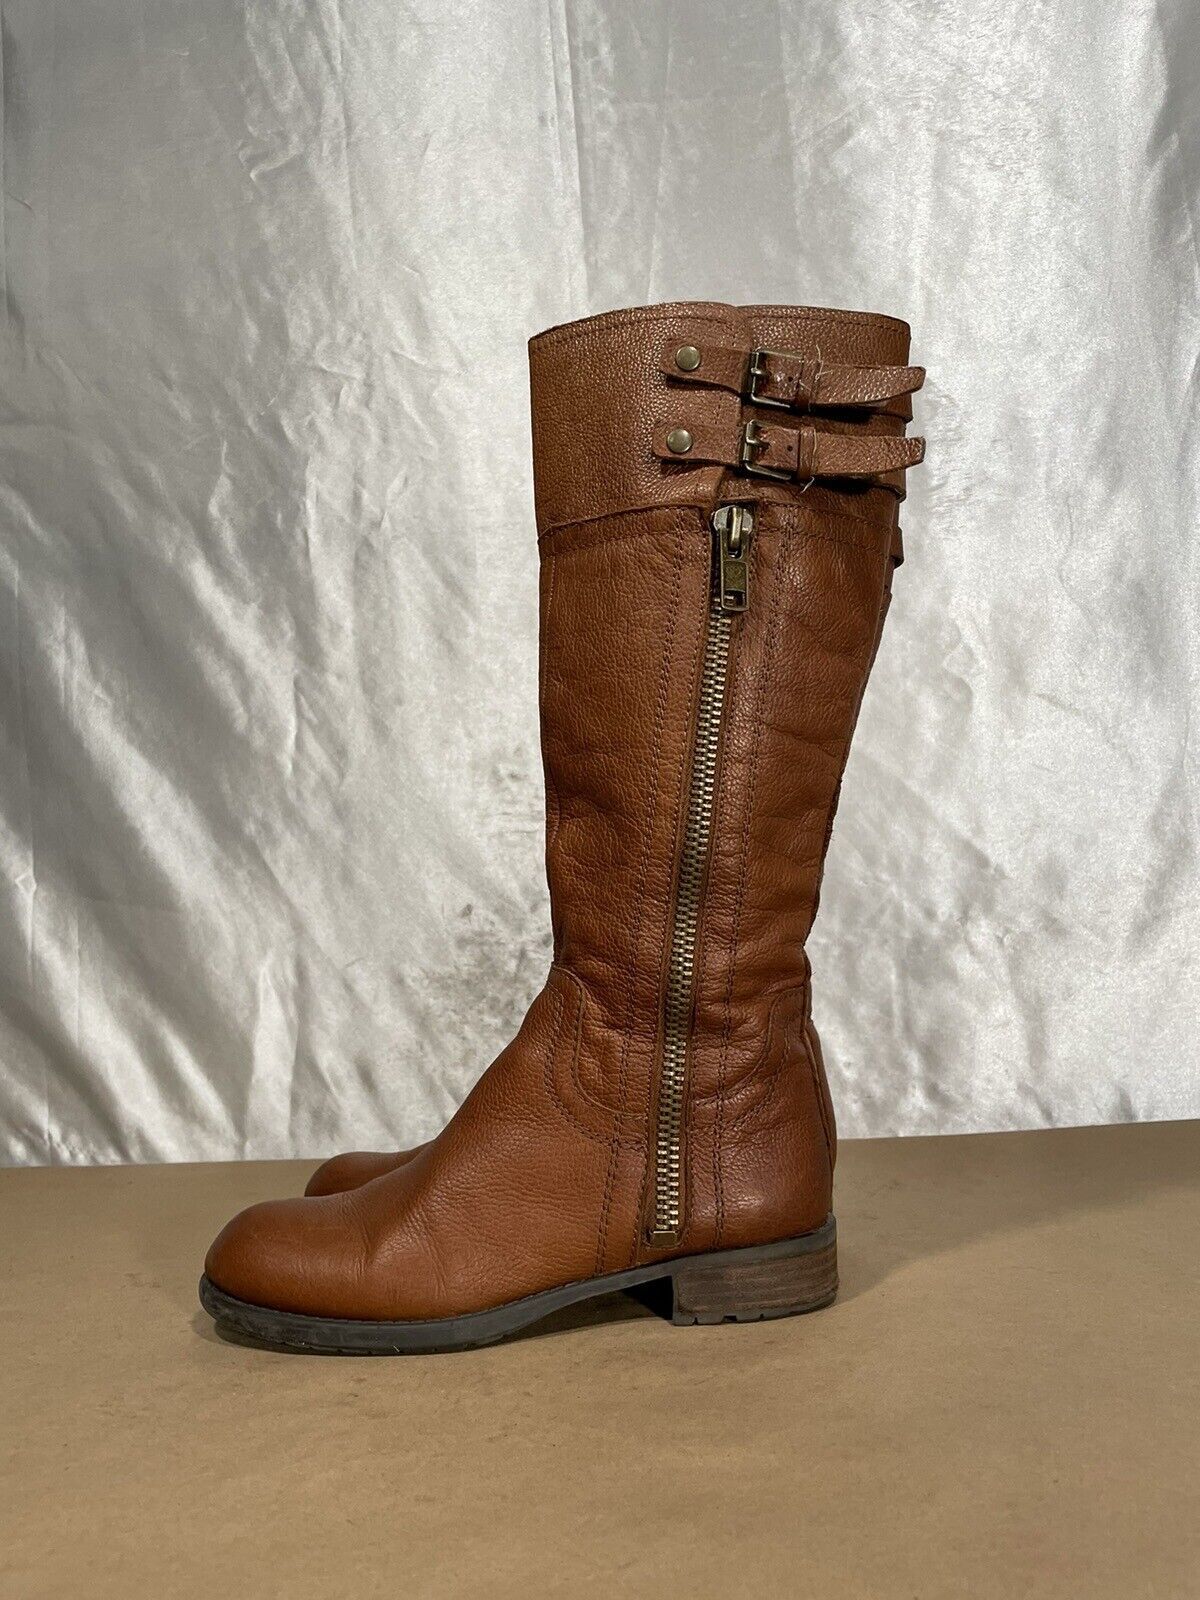 Primary image for Franco Sarto Poet Brown Leather Knee High Riding Boots Zip Buckle 6.5 M